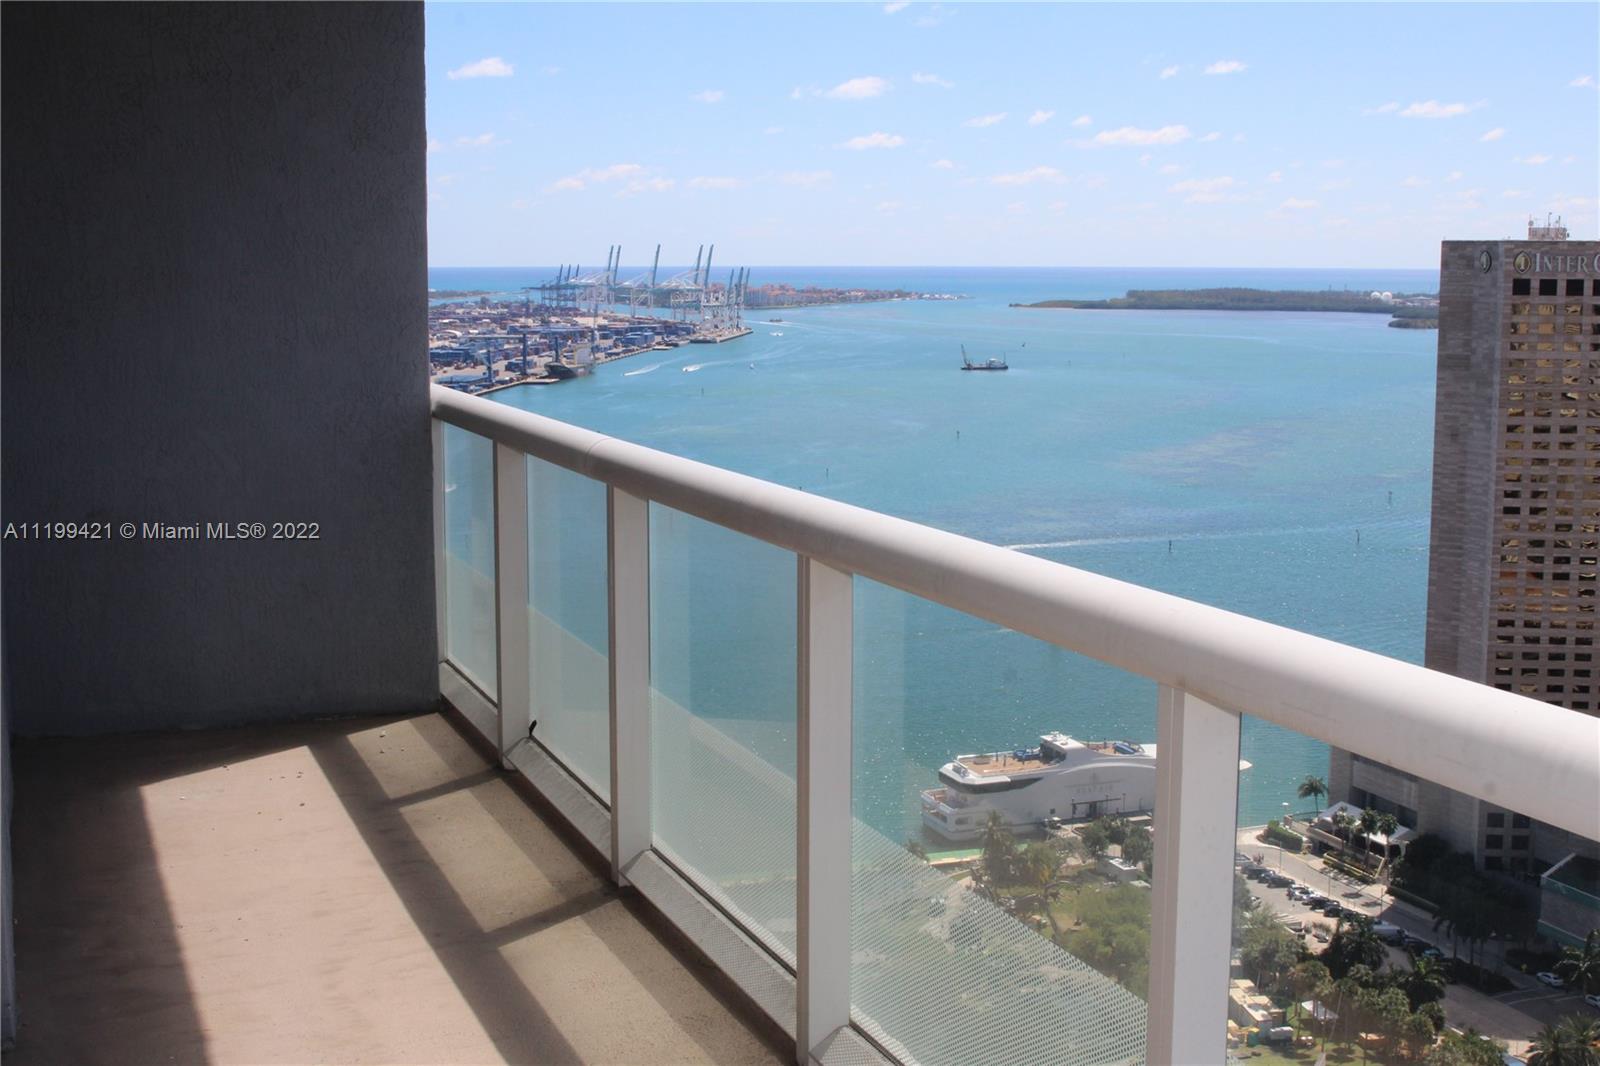 Exciting opportunity to live in the heart of Downtown Miami, beautiful 2 bedroom 2 bath corner residence featuring large wrap around terrace to enjoy views to the Bay and Ocean and ample City views.  Building offers large list of amenities including lap pool, spa, fitness center, steam room, sauna and more.  Short distance to Whole foods, banks, office buildings, shops, restaurants, Bayfront park.  Easy to show!